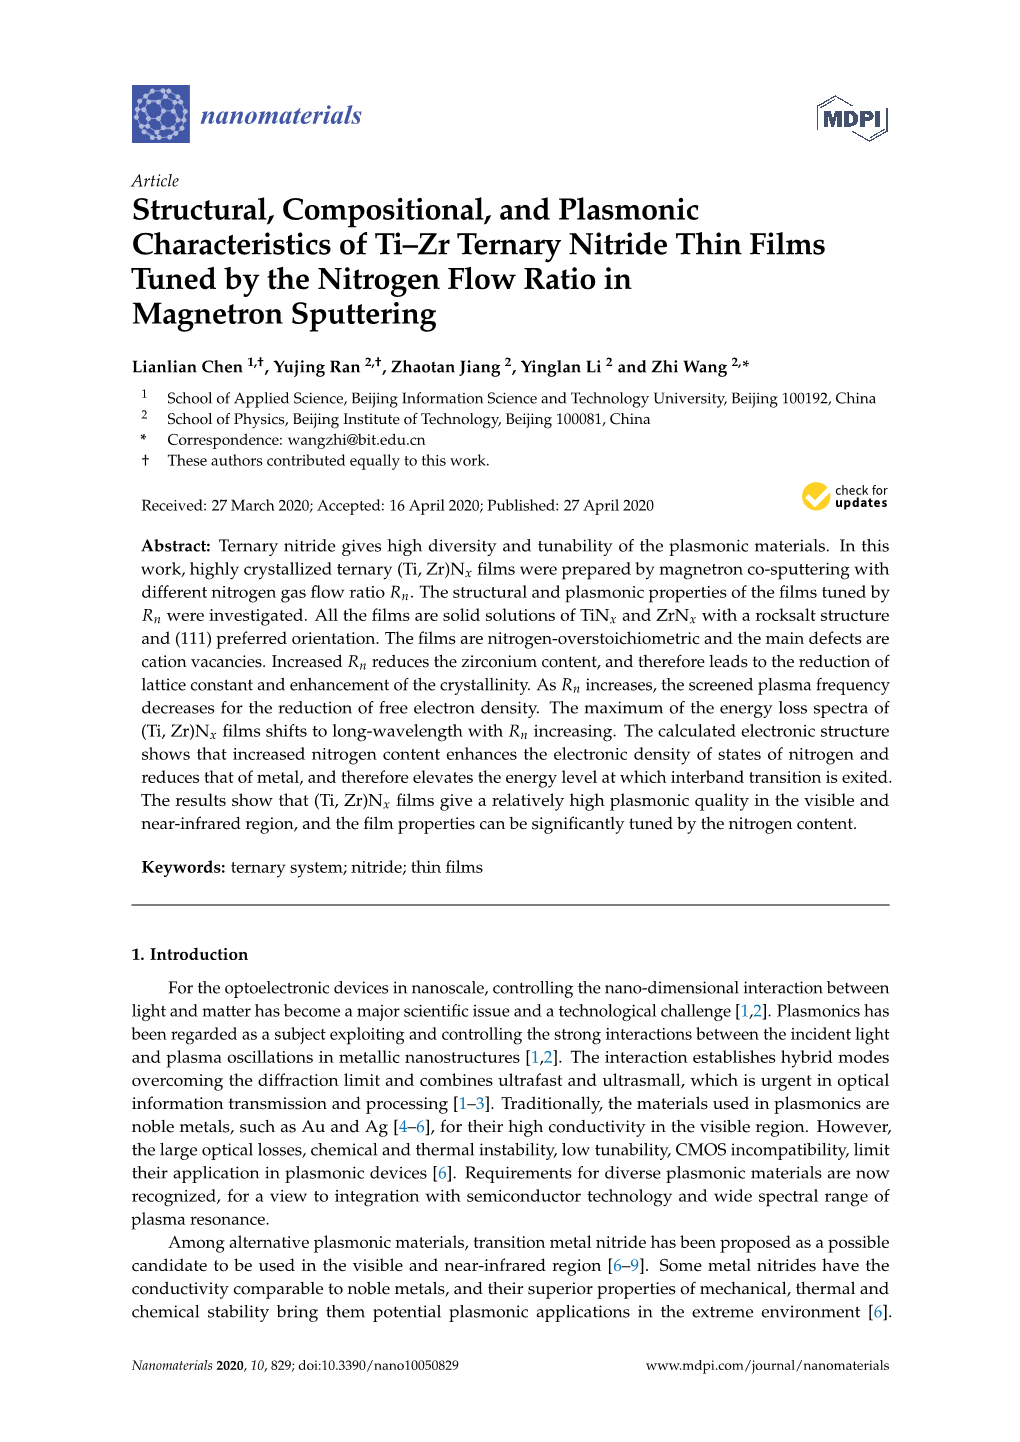 Structural, Compositional, and Plasmonic Characteristics of Ti–Zr Ternary Nitride Thin Films Tuned by the Nitrogen Flow Ratio in Magnetron Sputtering